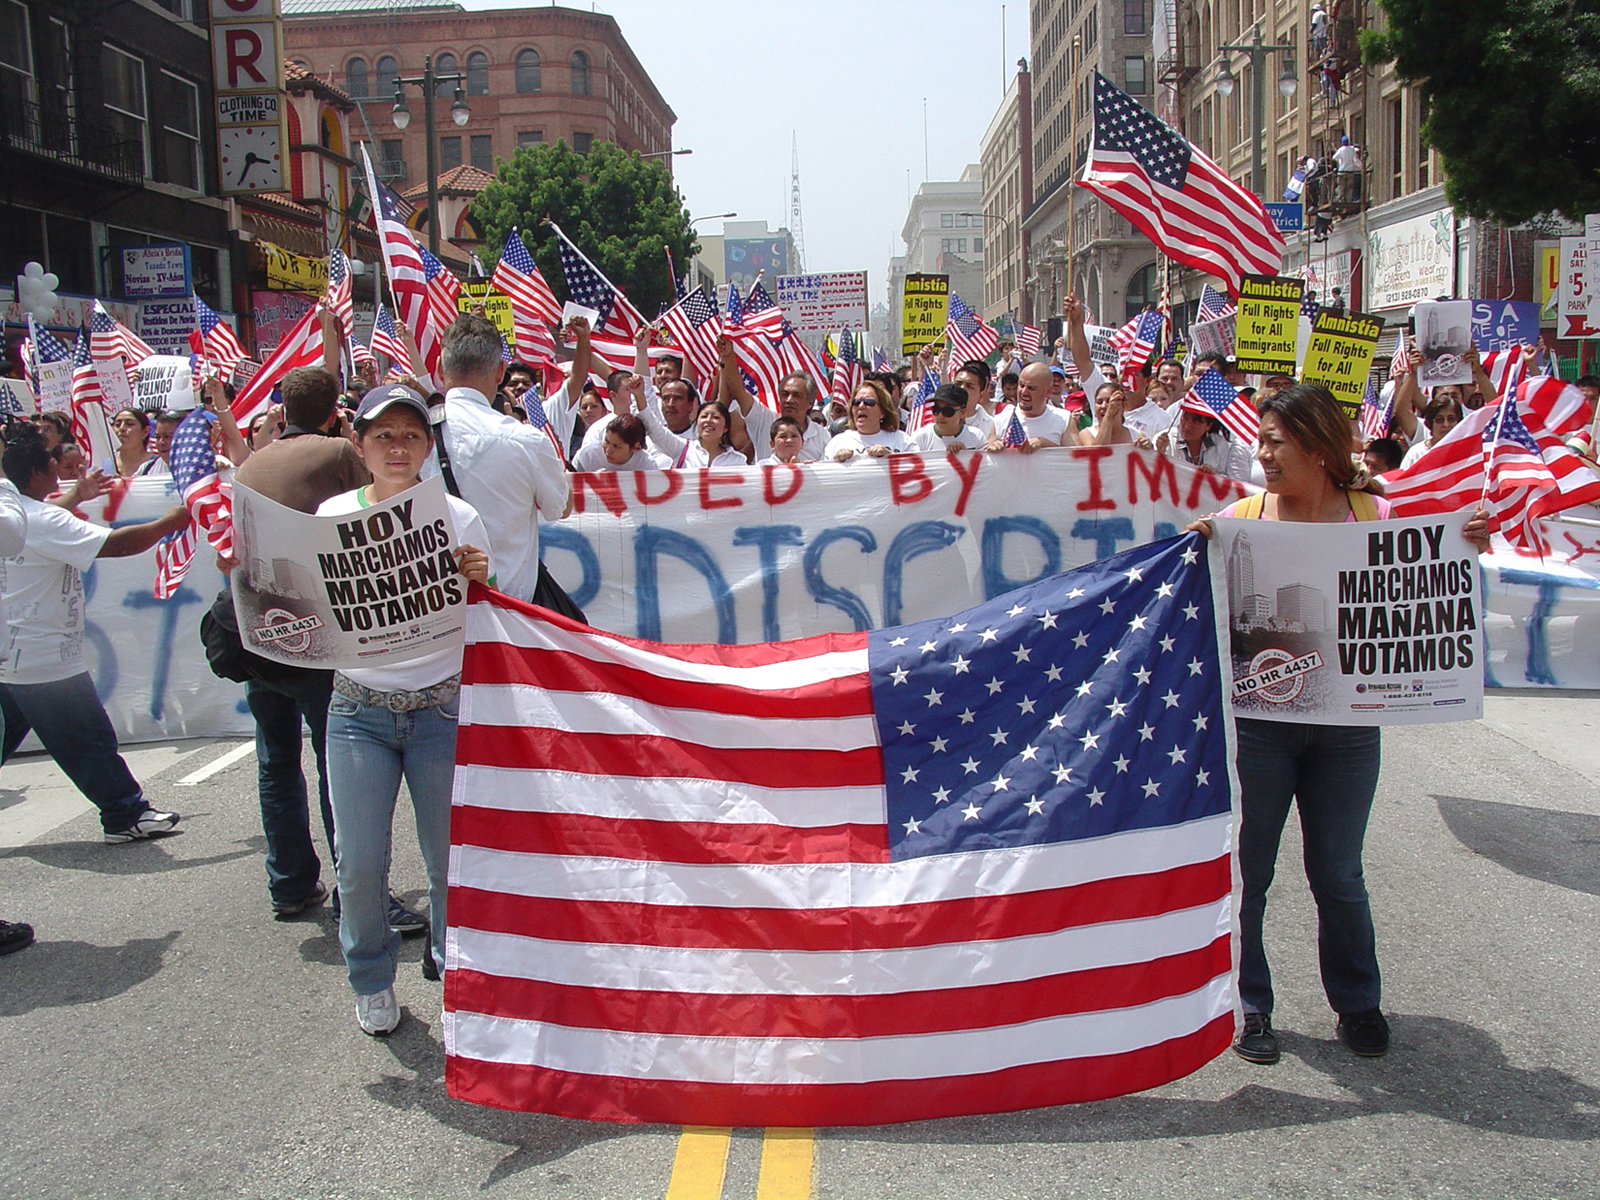 PHOTO: Immigration march to city hall in Los Angeles, California on May 1, 2006. Photo courtesy of Alfonso Romero